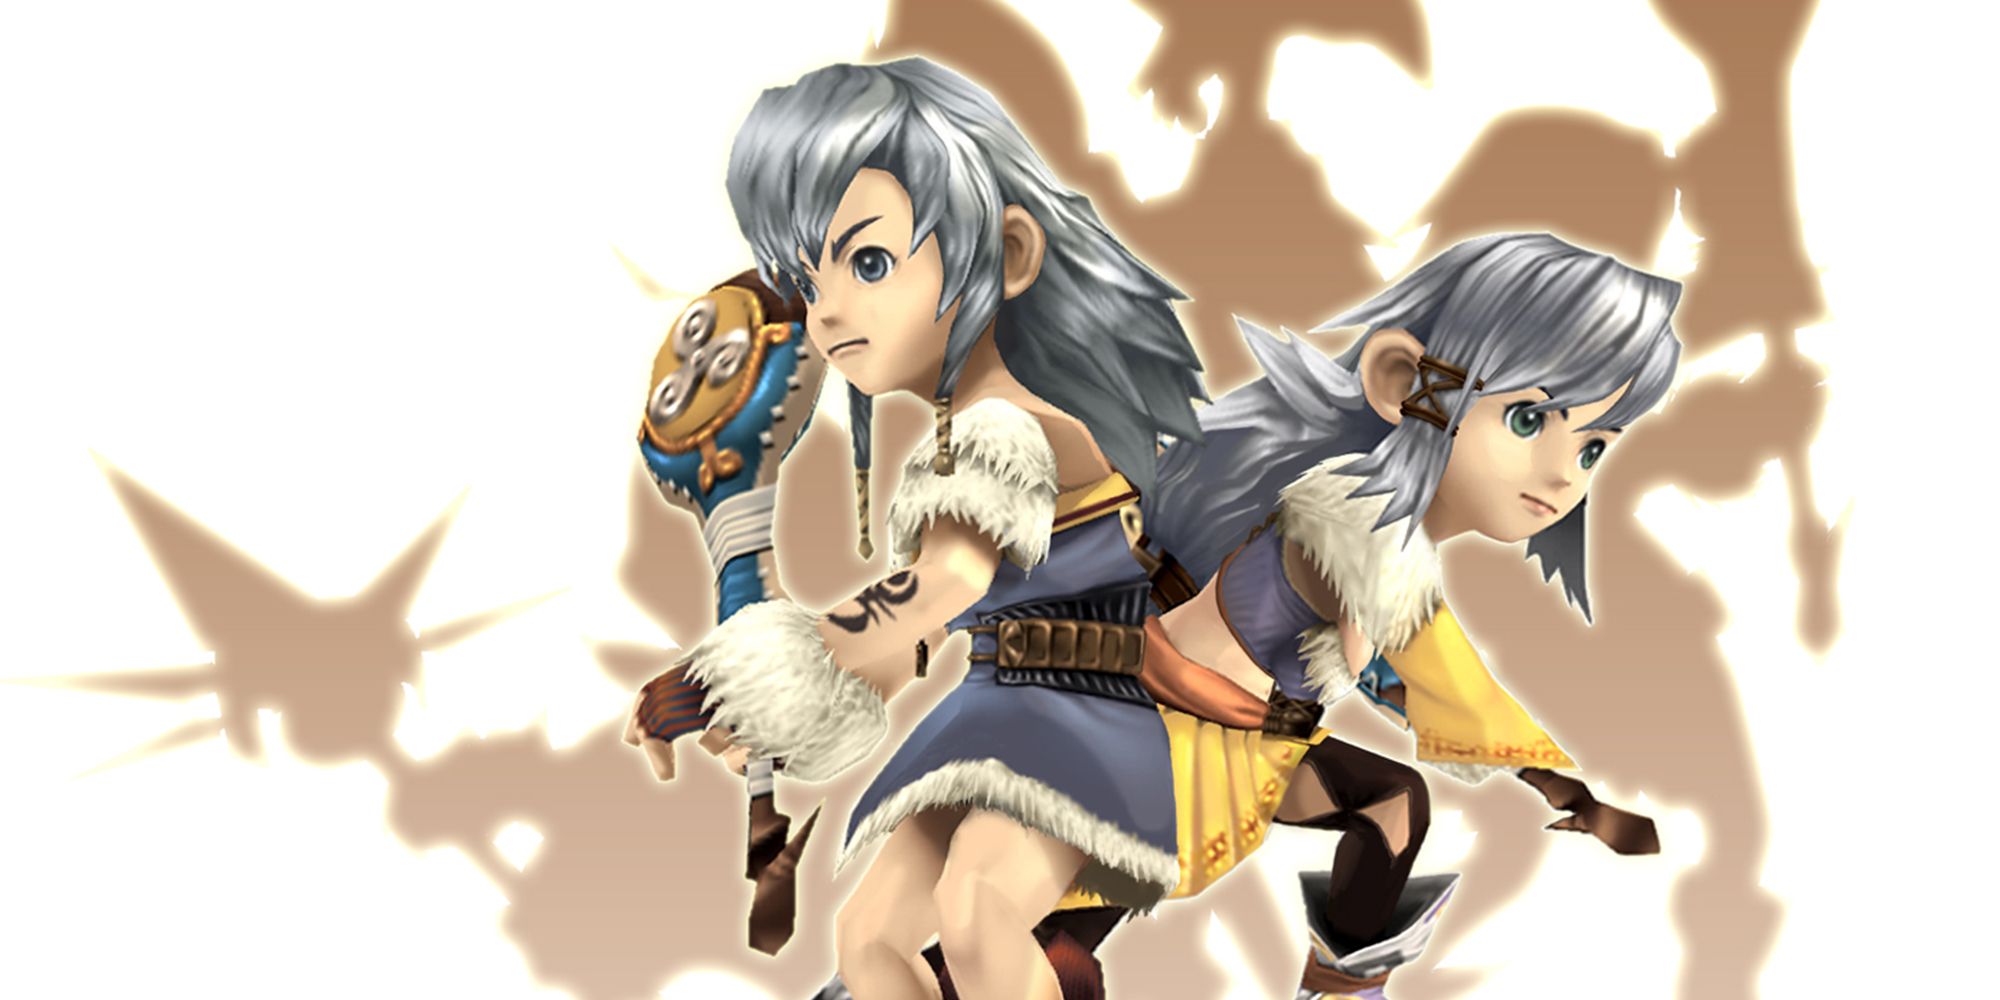 Final Fantasy Crystal Chronicles Selkie